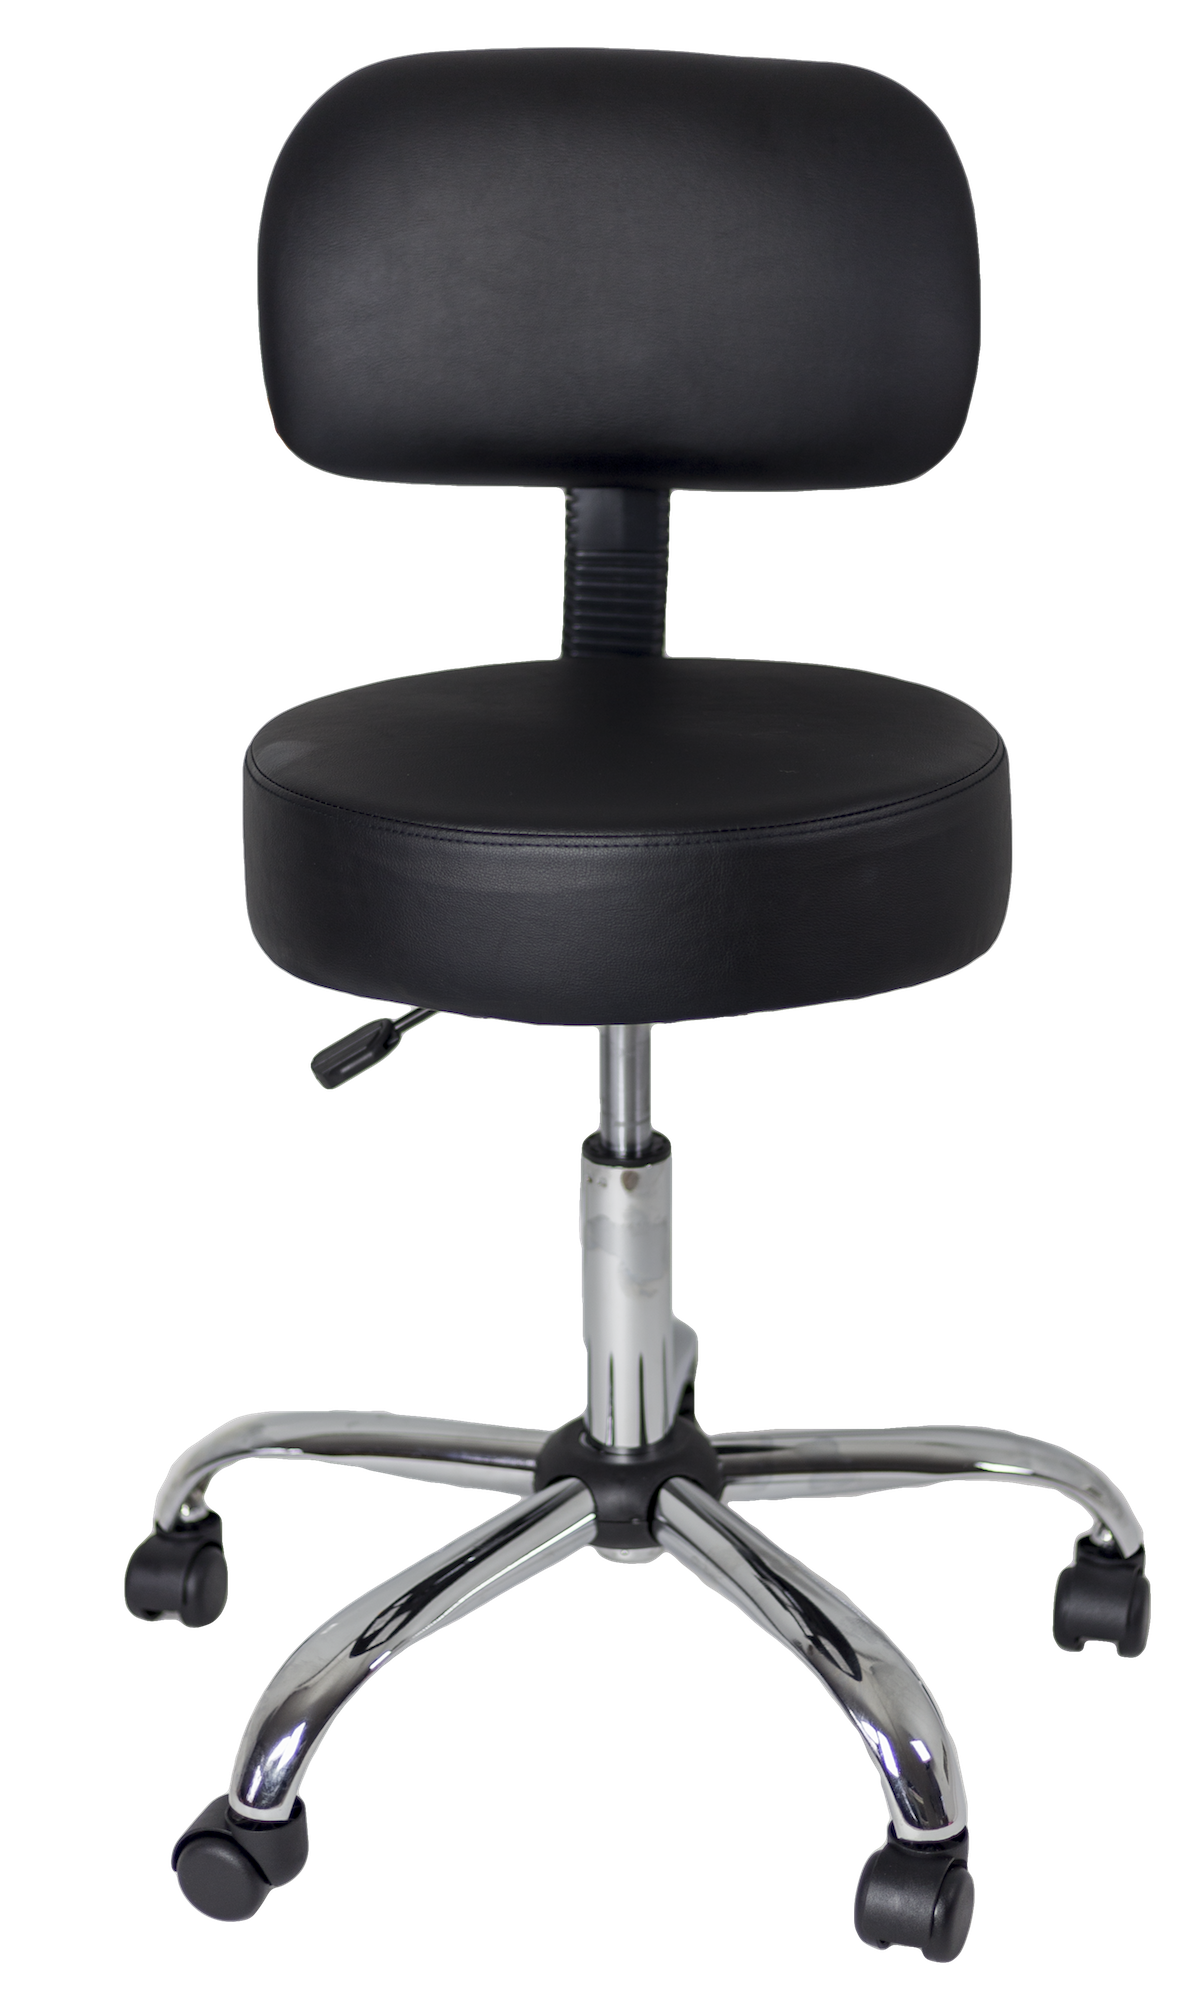 Best Chair For Practicing Guitar Hub Guitar